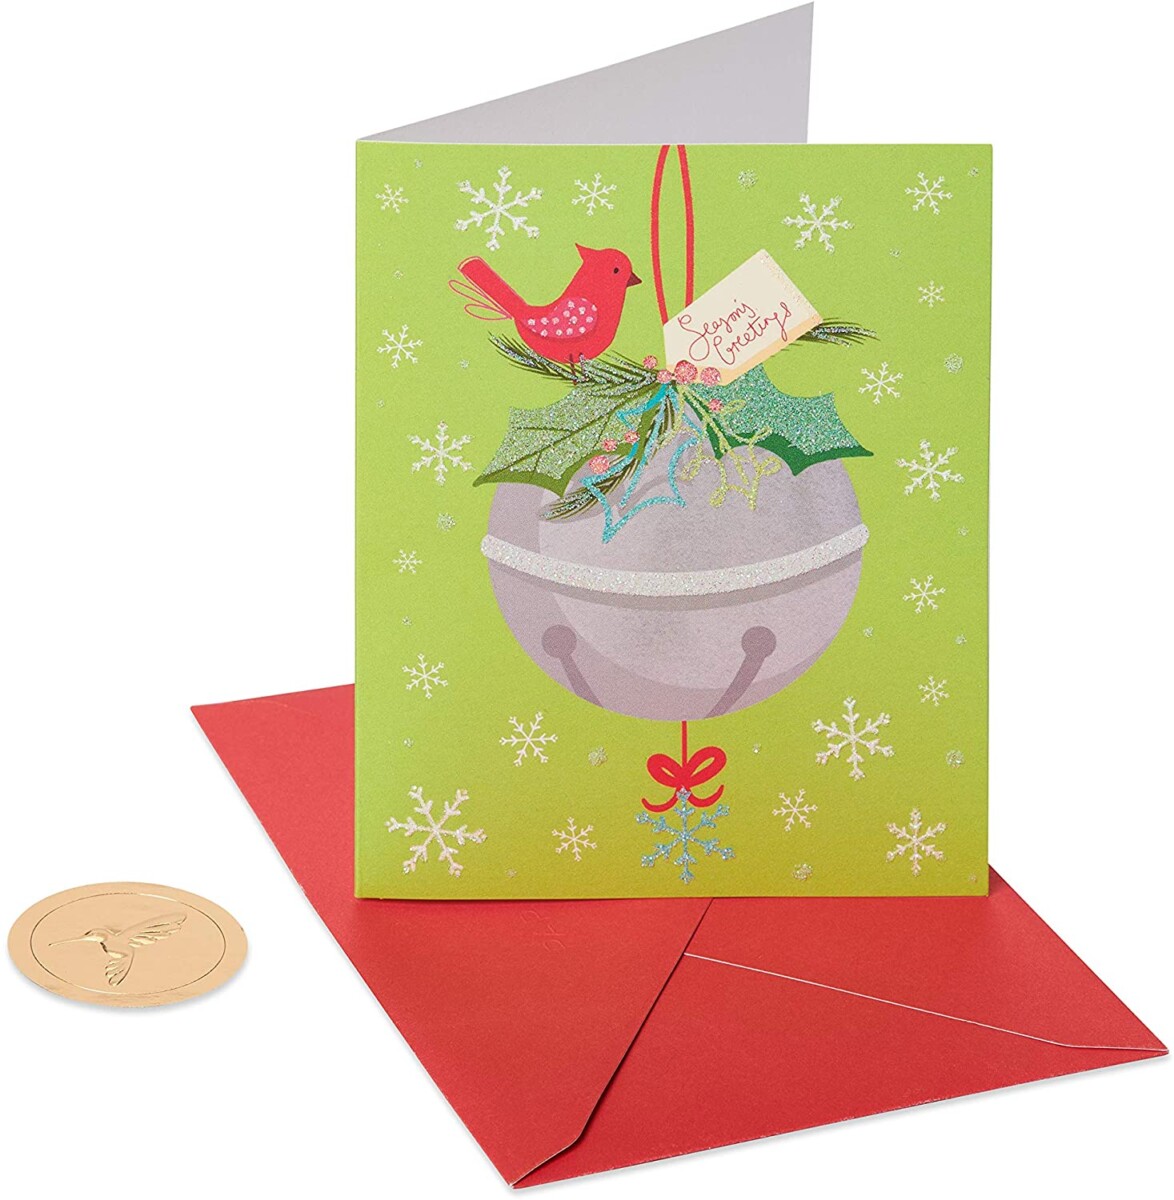 Alea's Deals 68% Off Papyrus Christmas Cards Boxed,Holiday Jingle Bells (20-Count)! Was $14.95!  